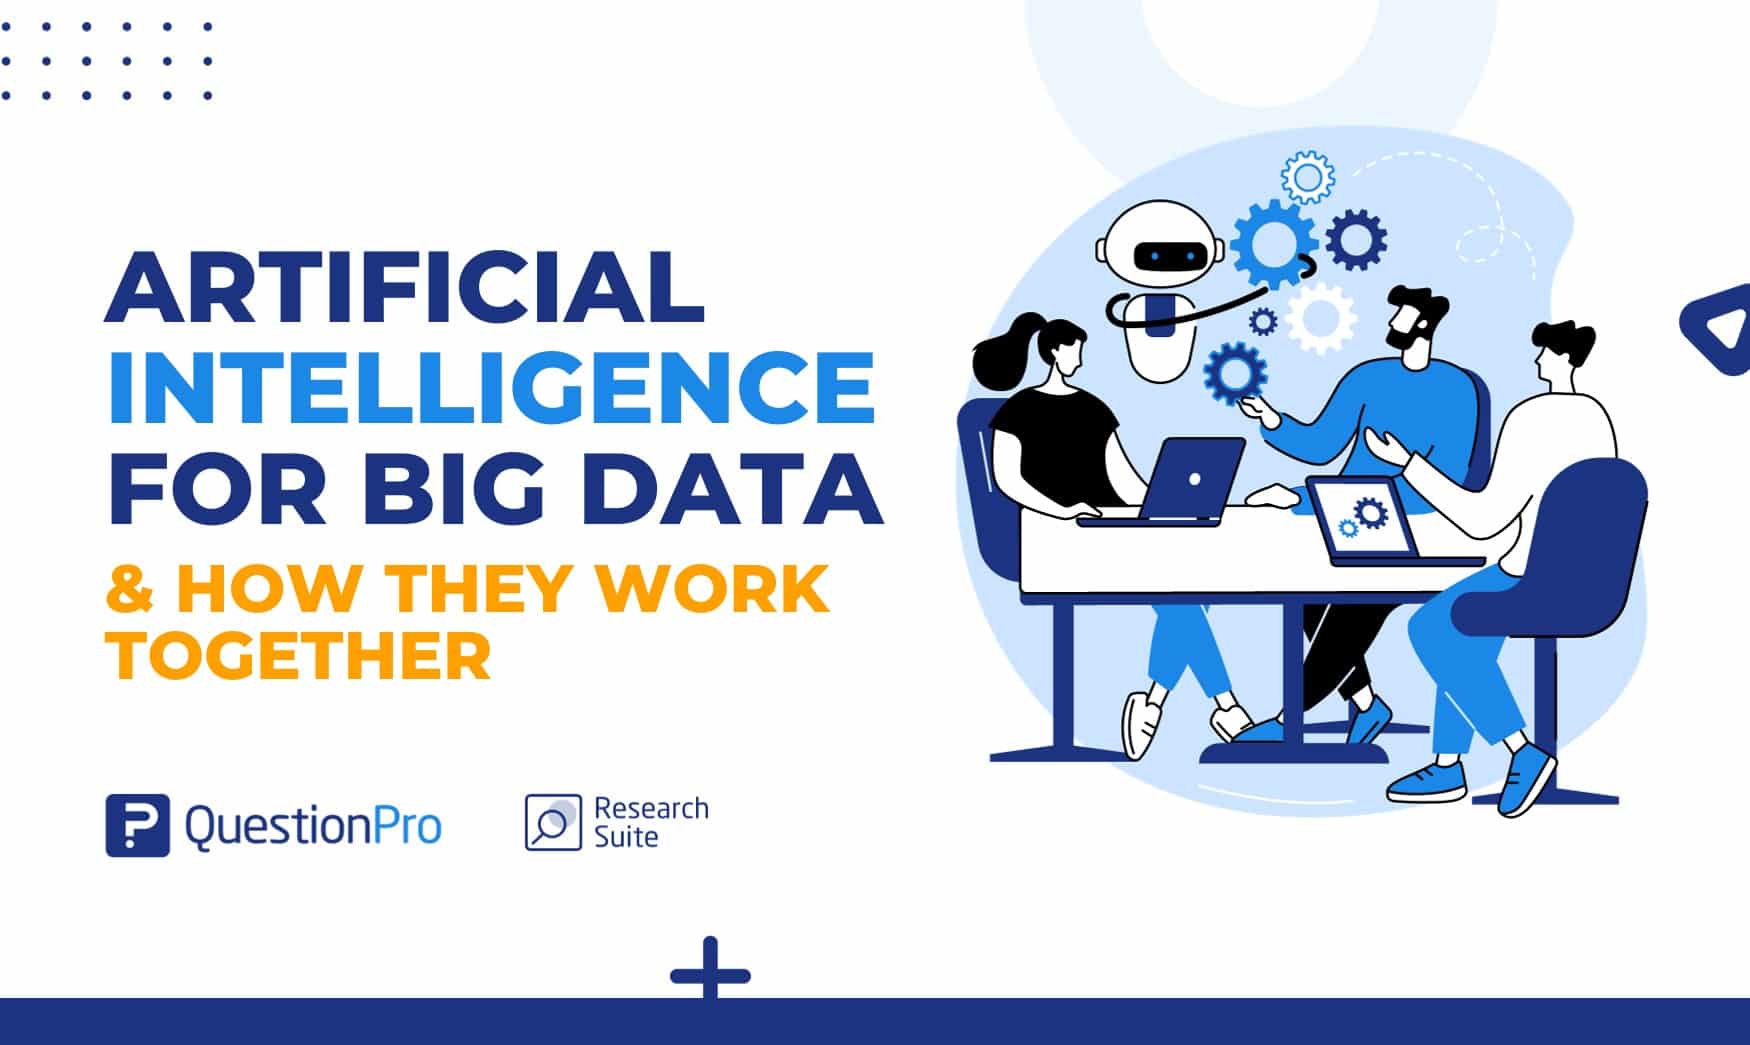 Explore the role of Artificial Intelligence for big data, their similarities and differences and the introduction of AI to the world of data.